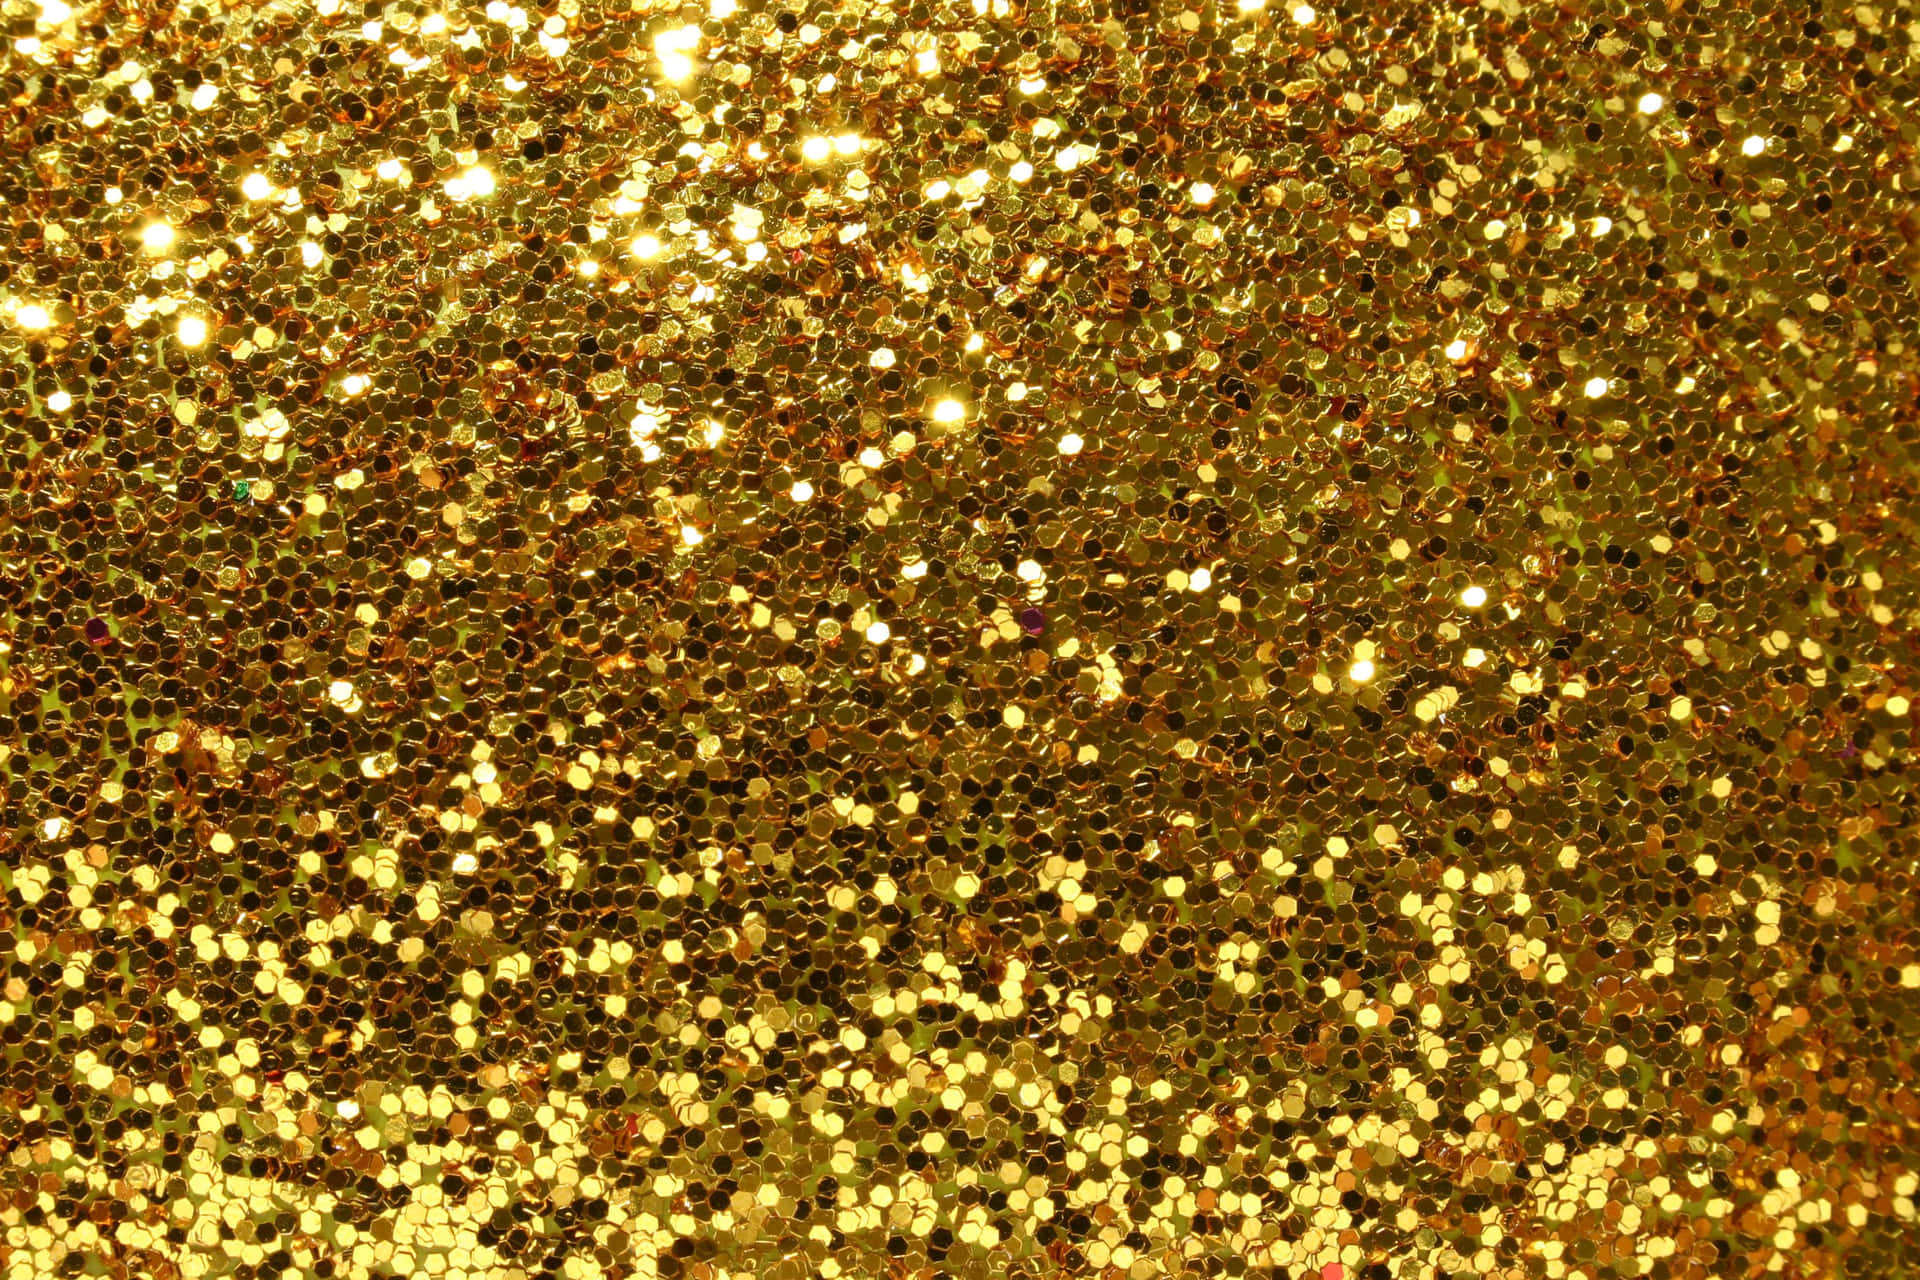 200+] Gold Glitter Background s for FREE 